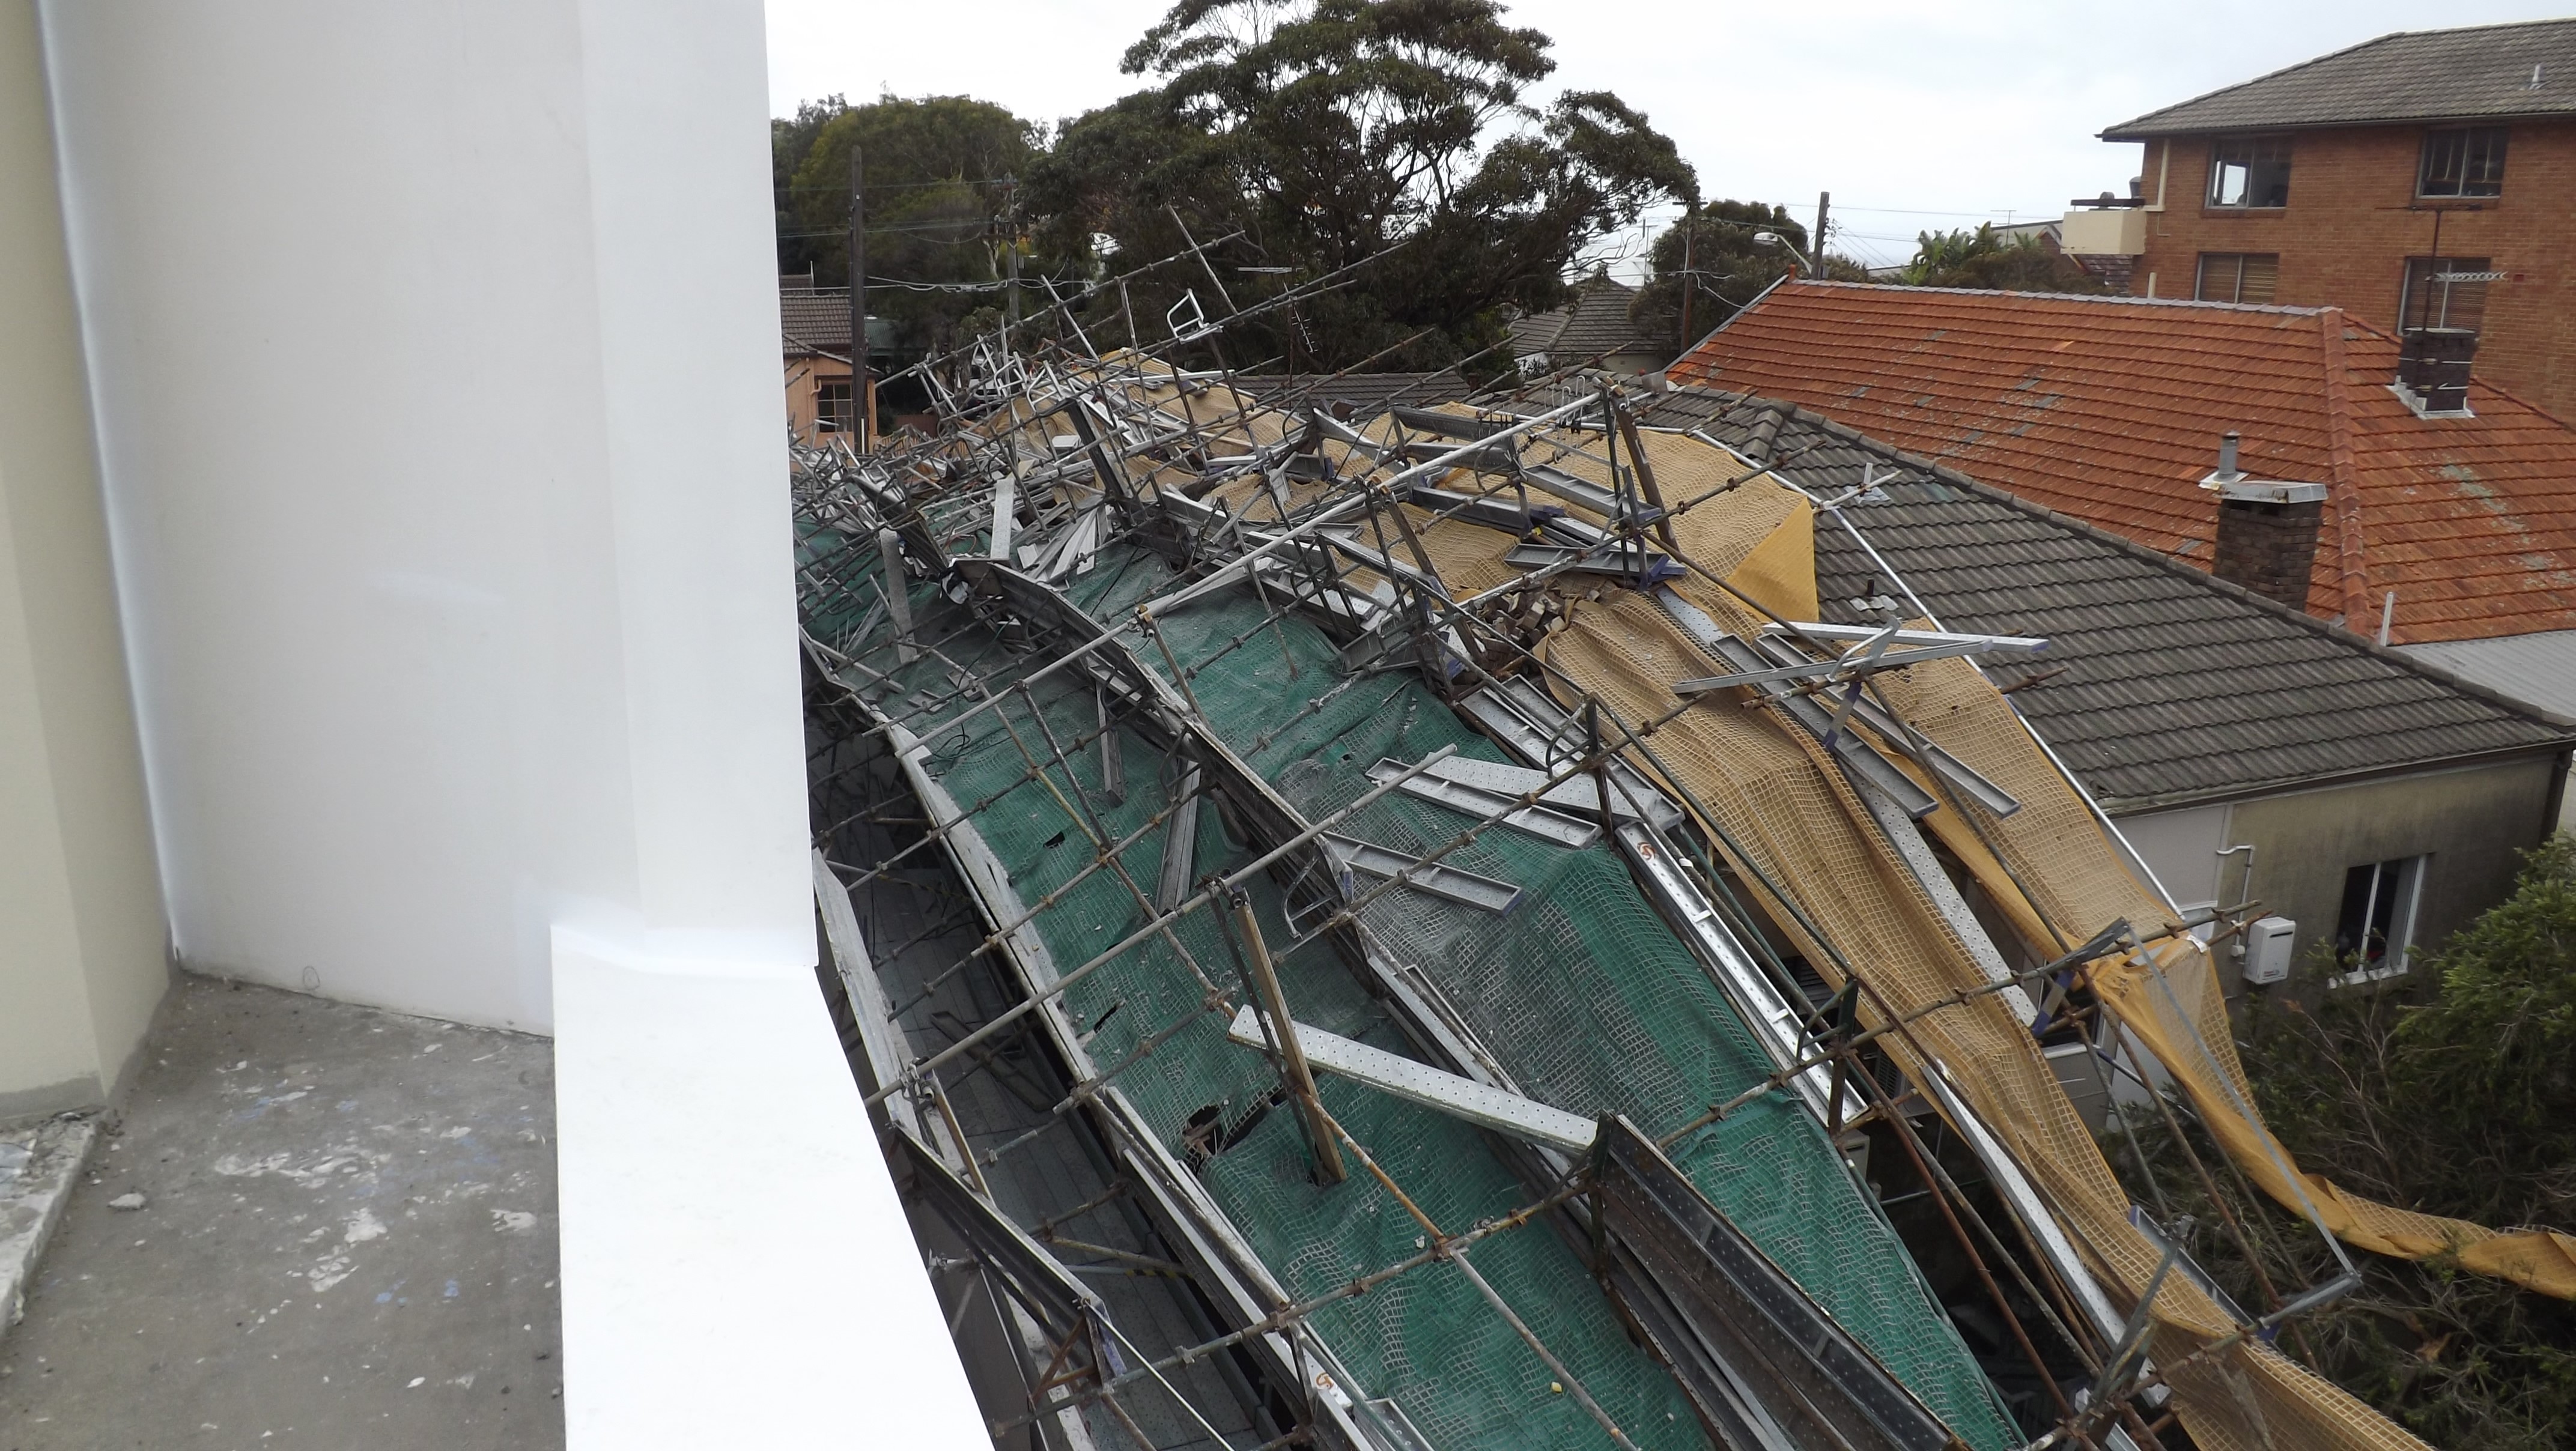 View of the 4-storey scaffolding which has collapsed and fallen onto neighbouring property